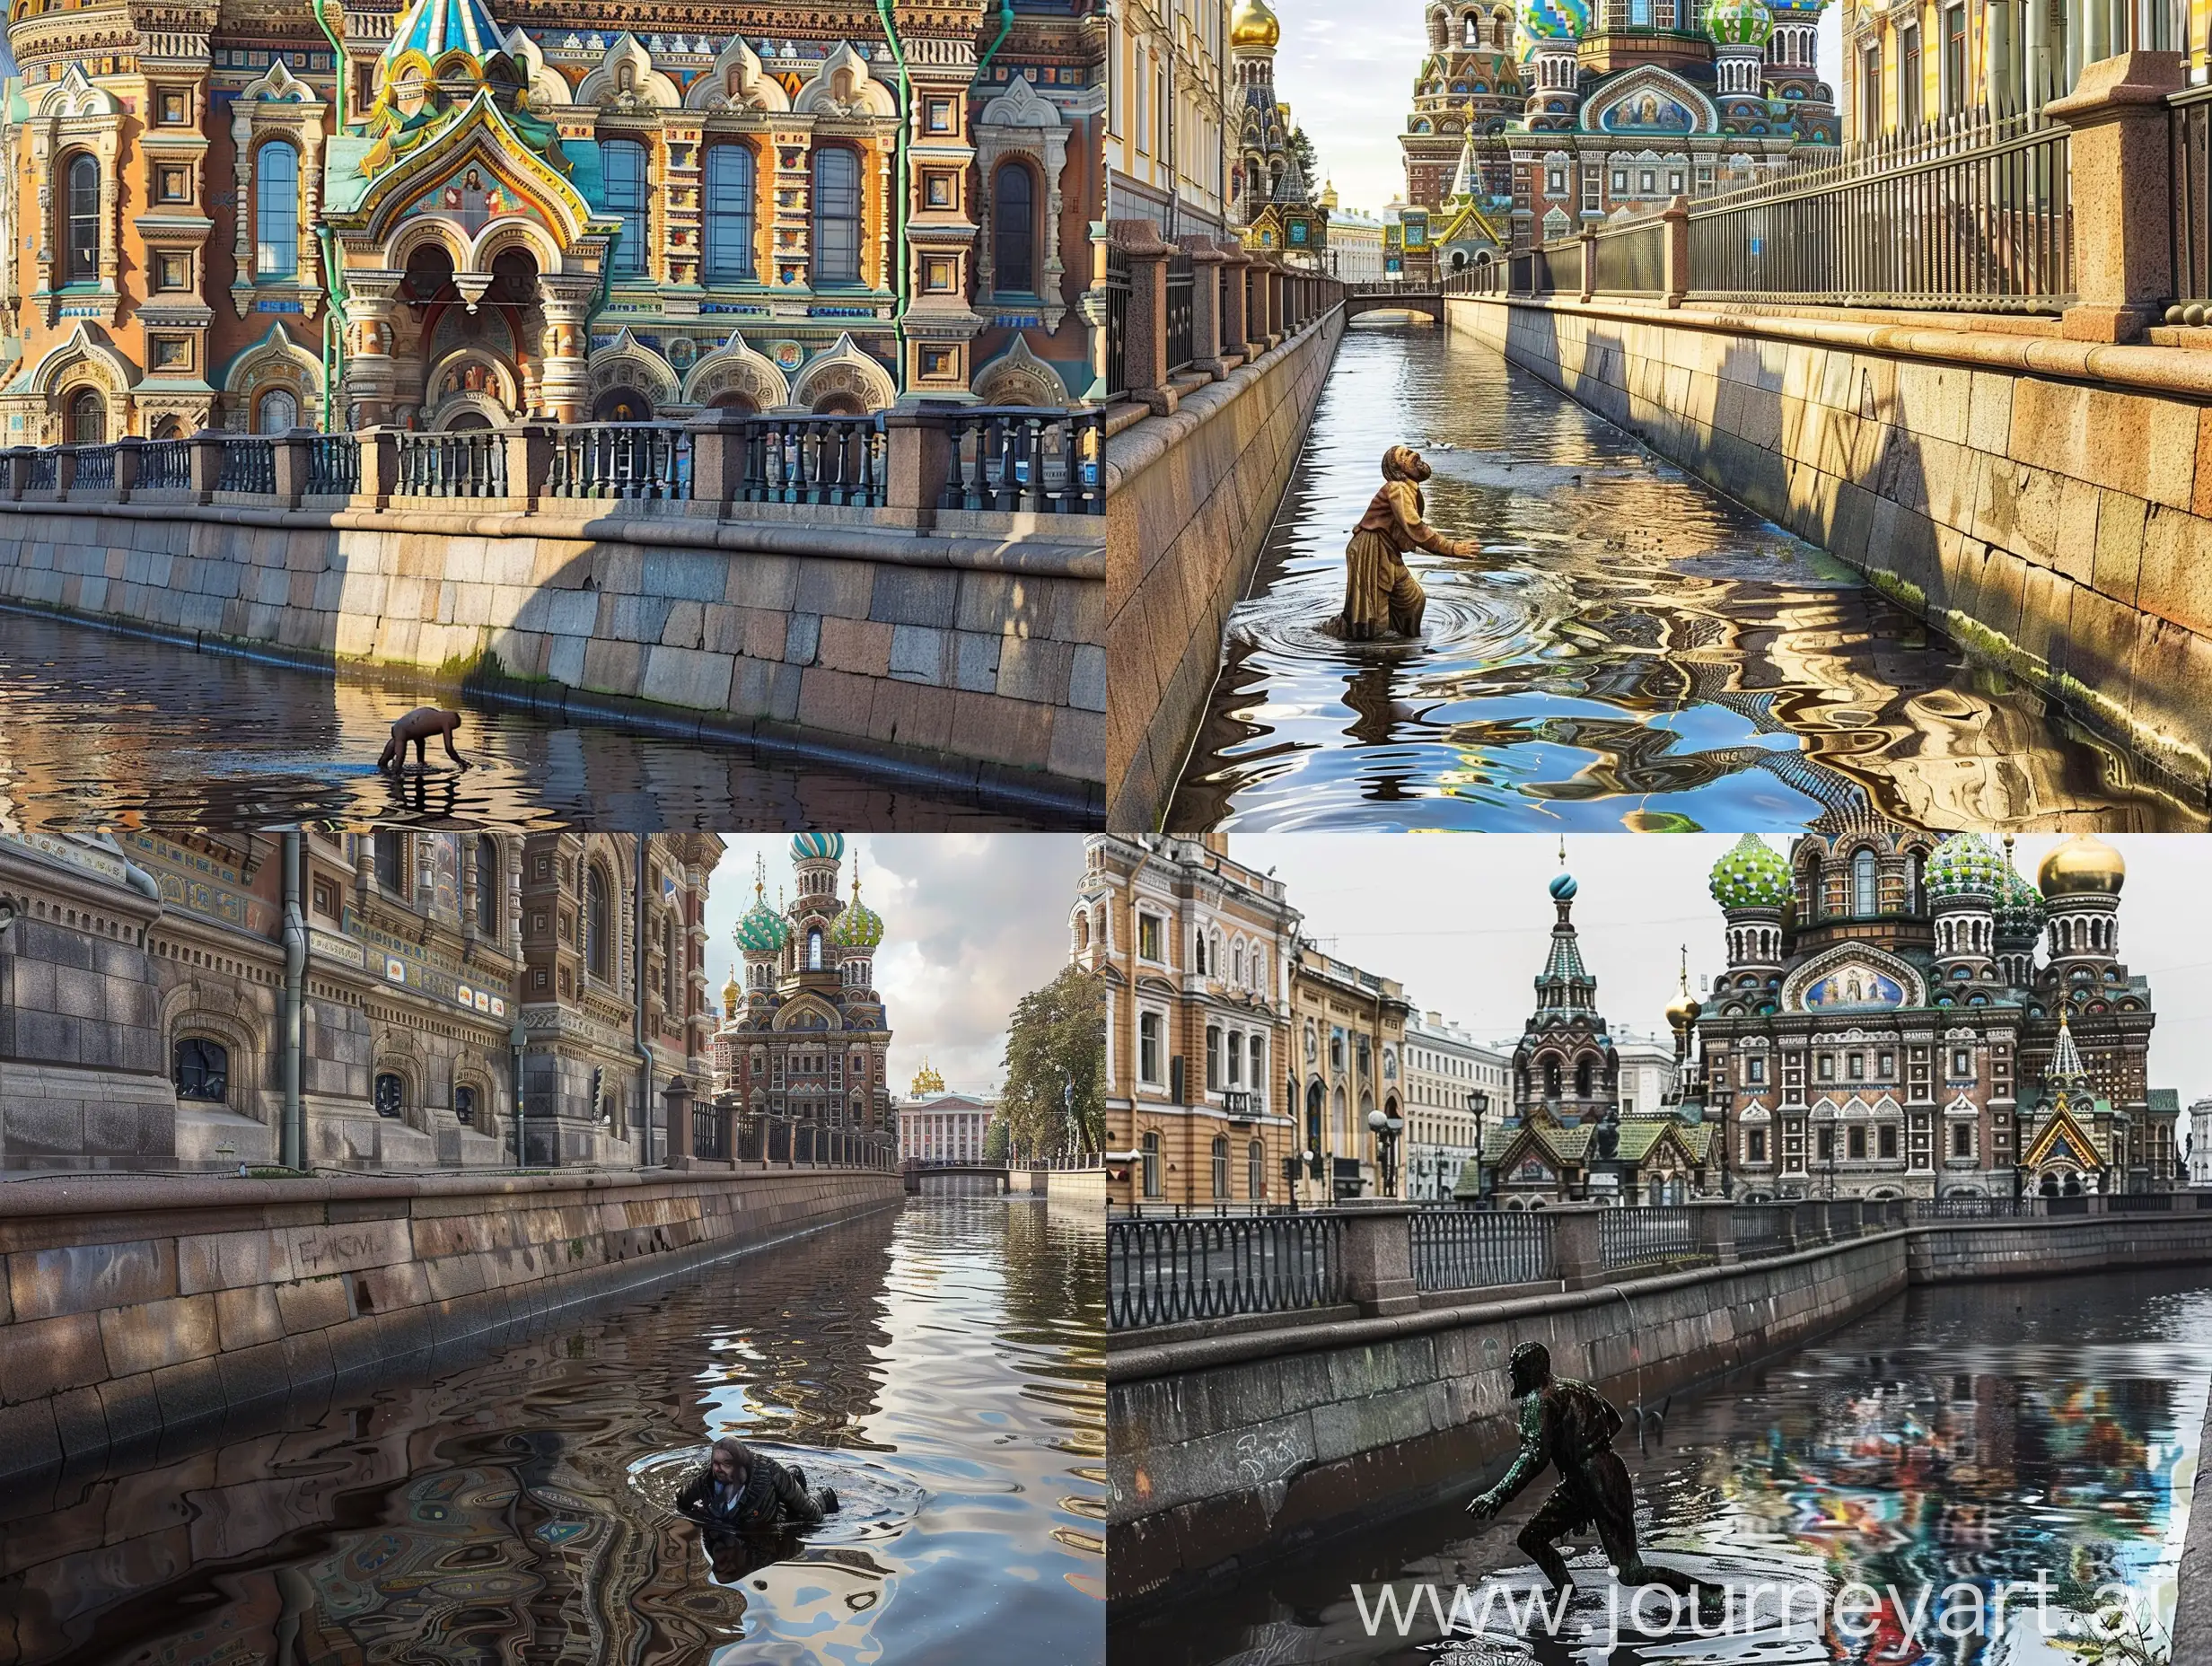 the nearly drowned figure of Rasputin crawling up from the canal near the Russian Church of the Savior on Spilled Blood in Saint Petersburg, with its gleaming mosaics & marble line this richly decorated 1880s church topped with colorful onion domes